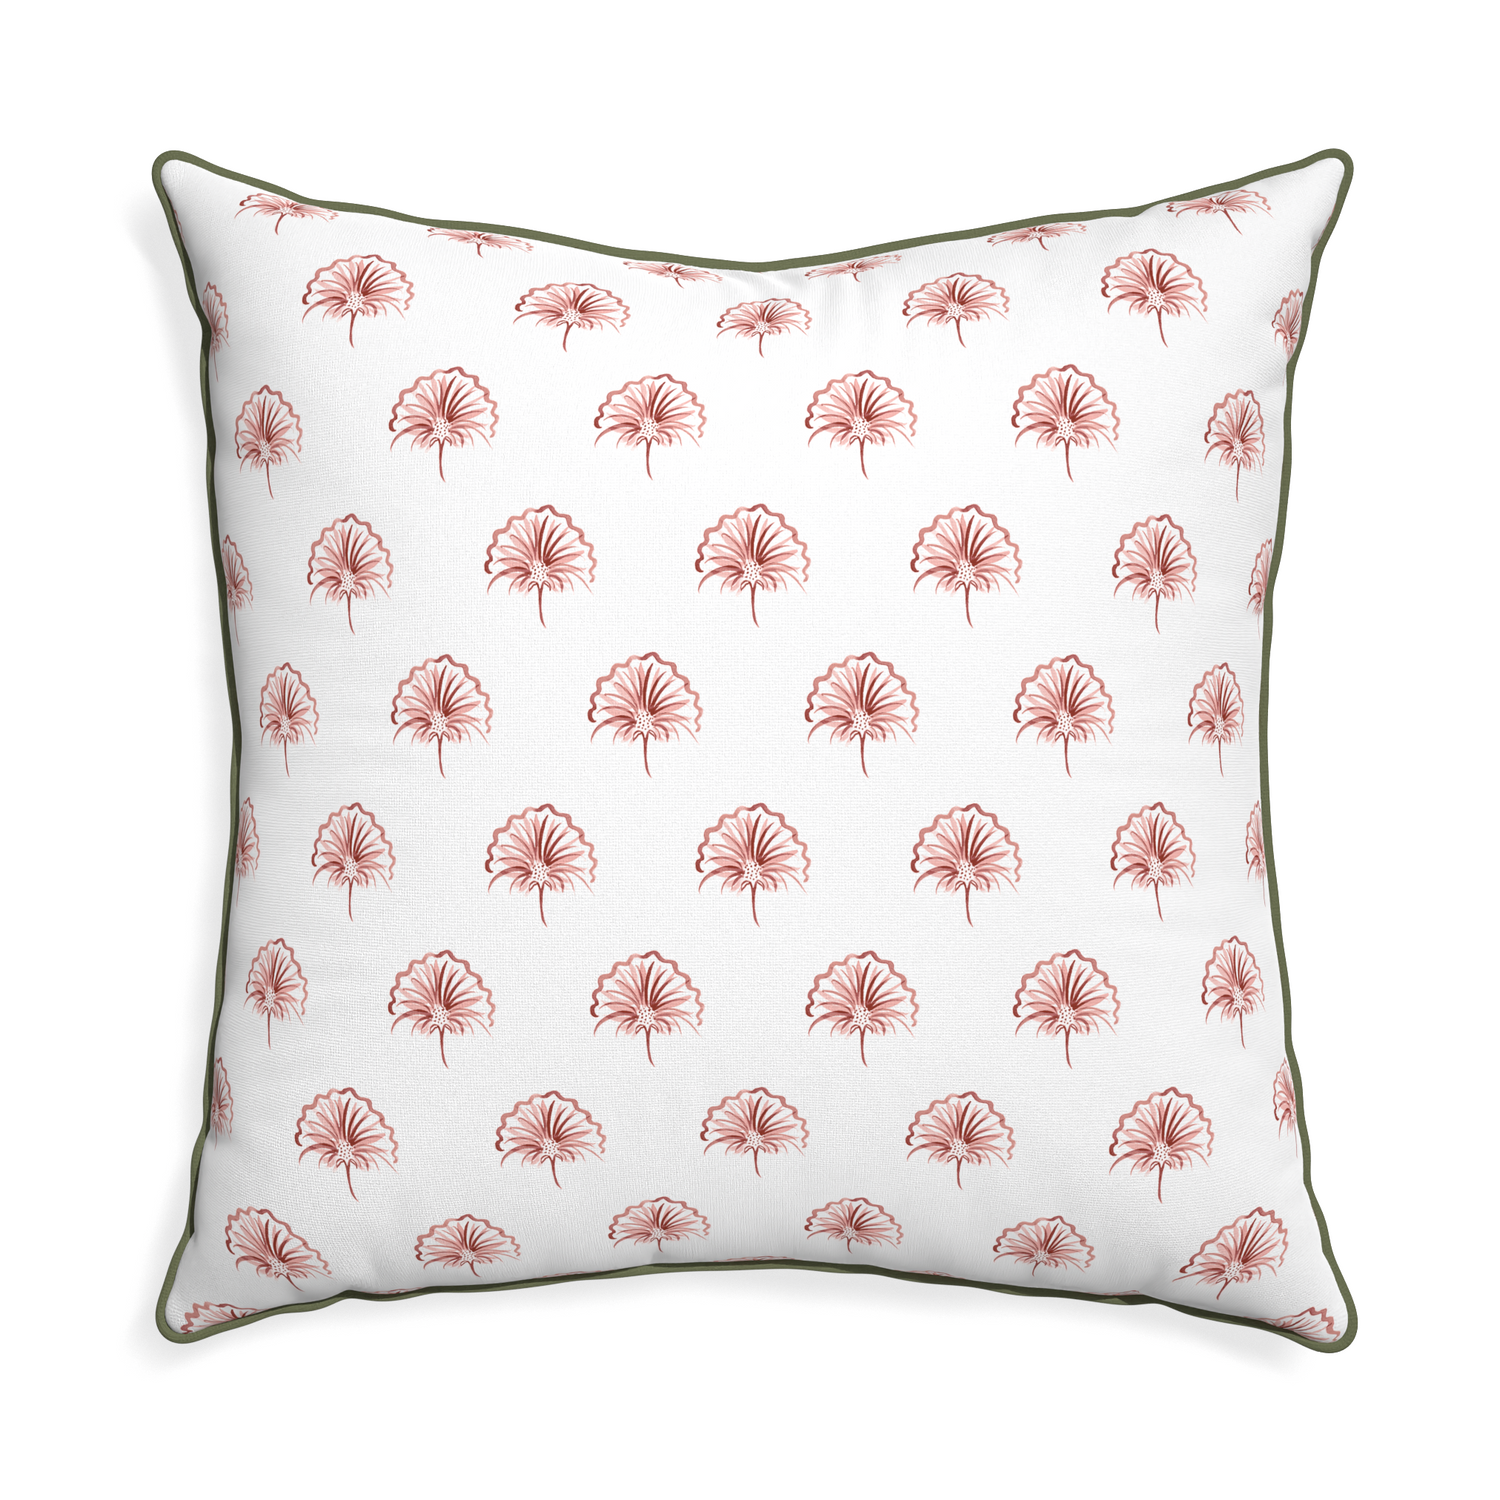 Euro-sham penelope rose custom pillow with f piping on white background